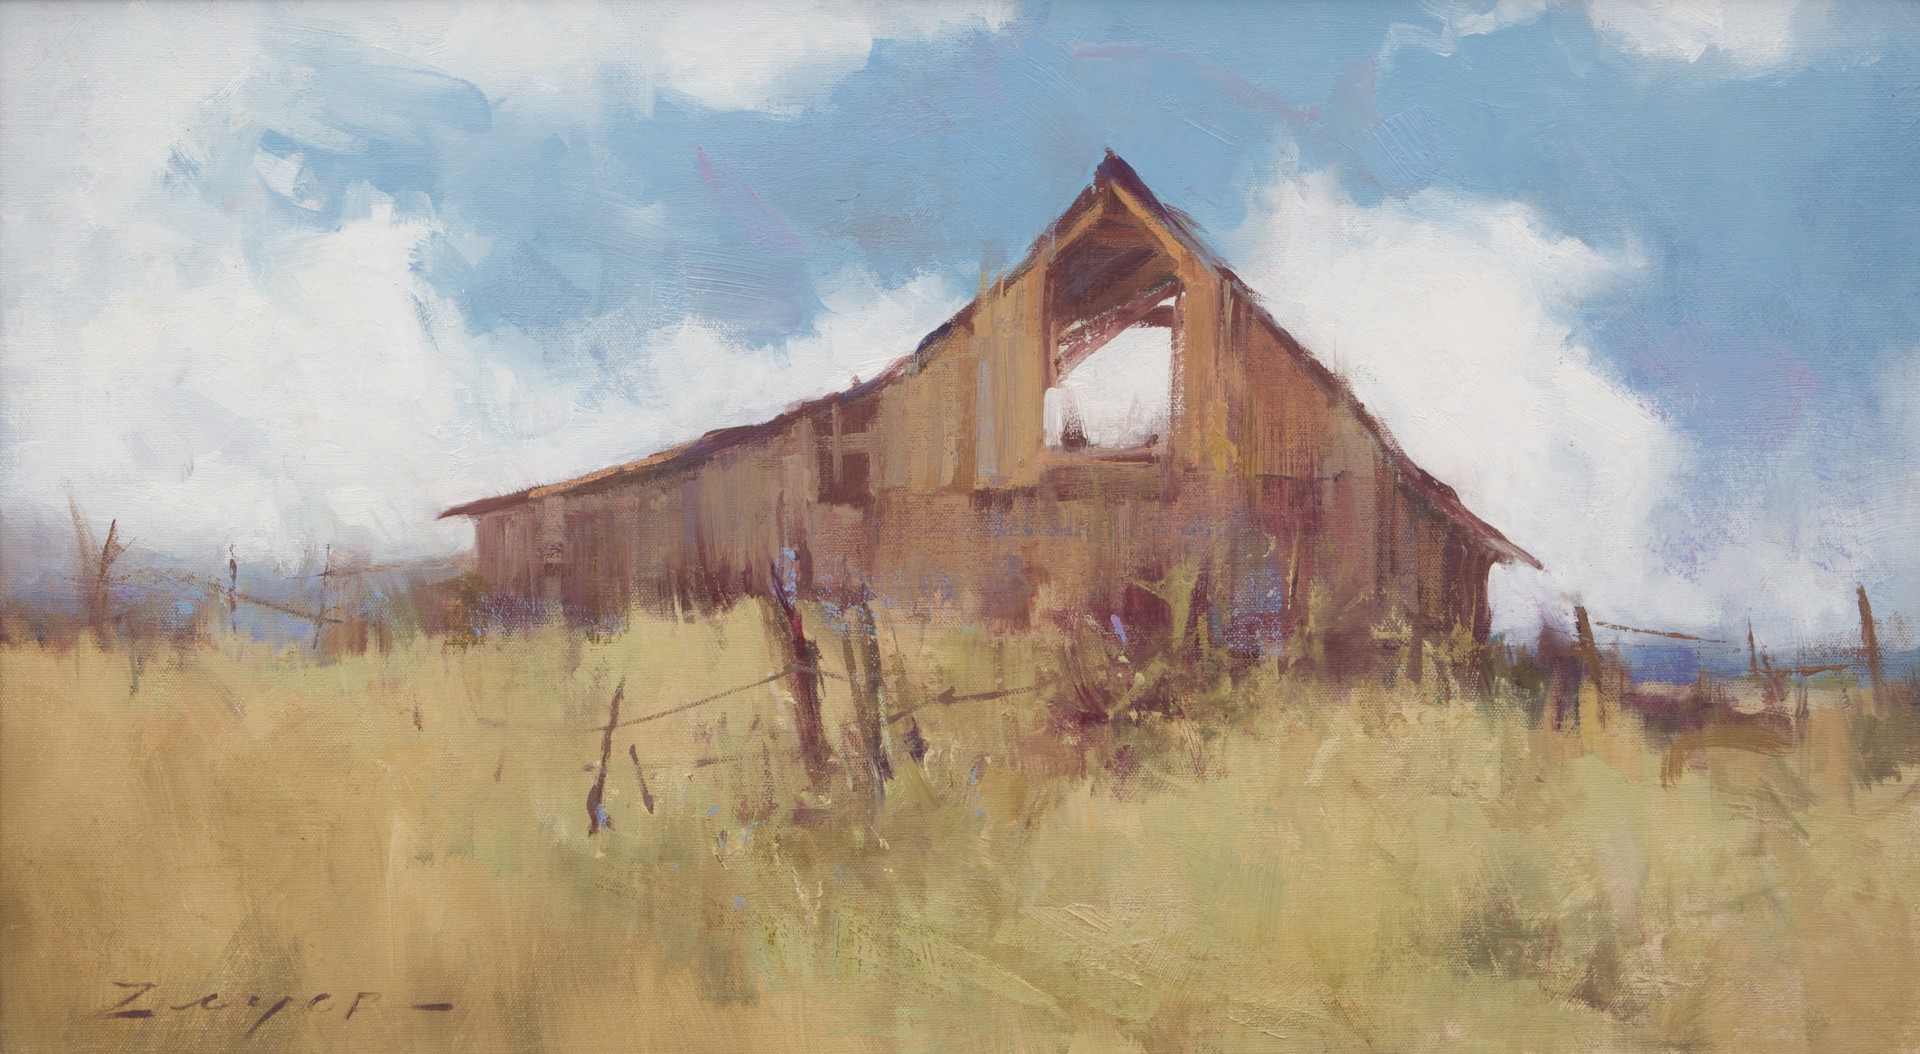 Rustic Charm Under a Western Sky by Allie Zeyer